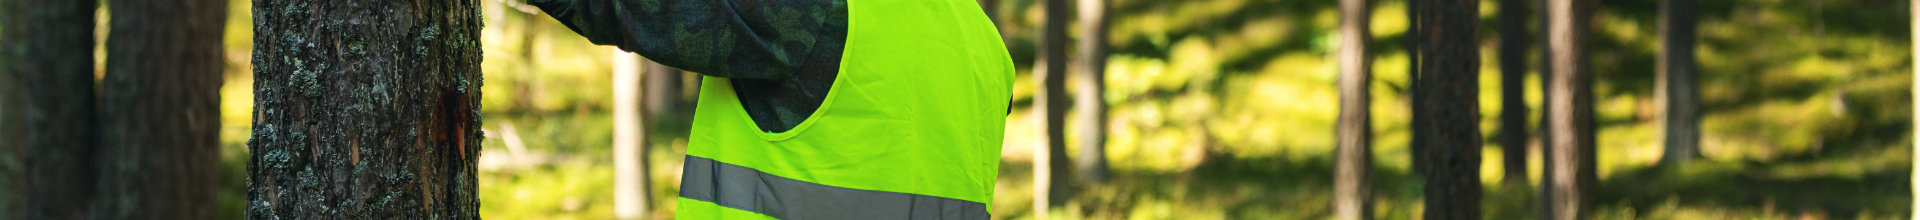 Banner image featuring a high-viz jacket being worn by someone working within a forest stand.